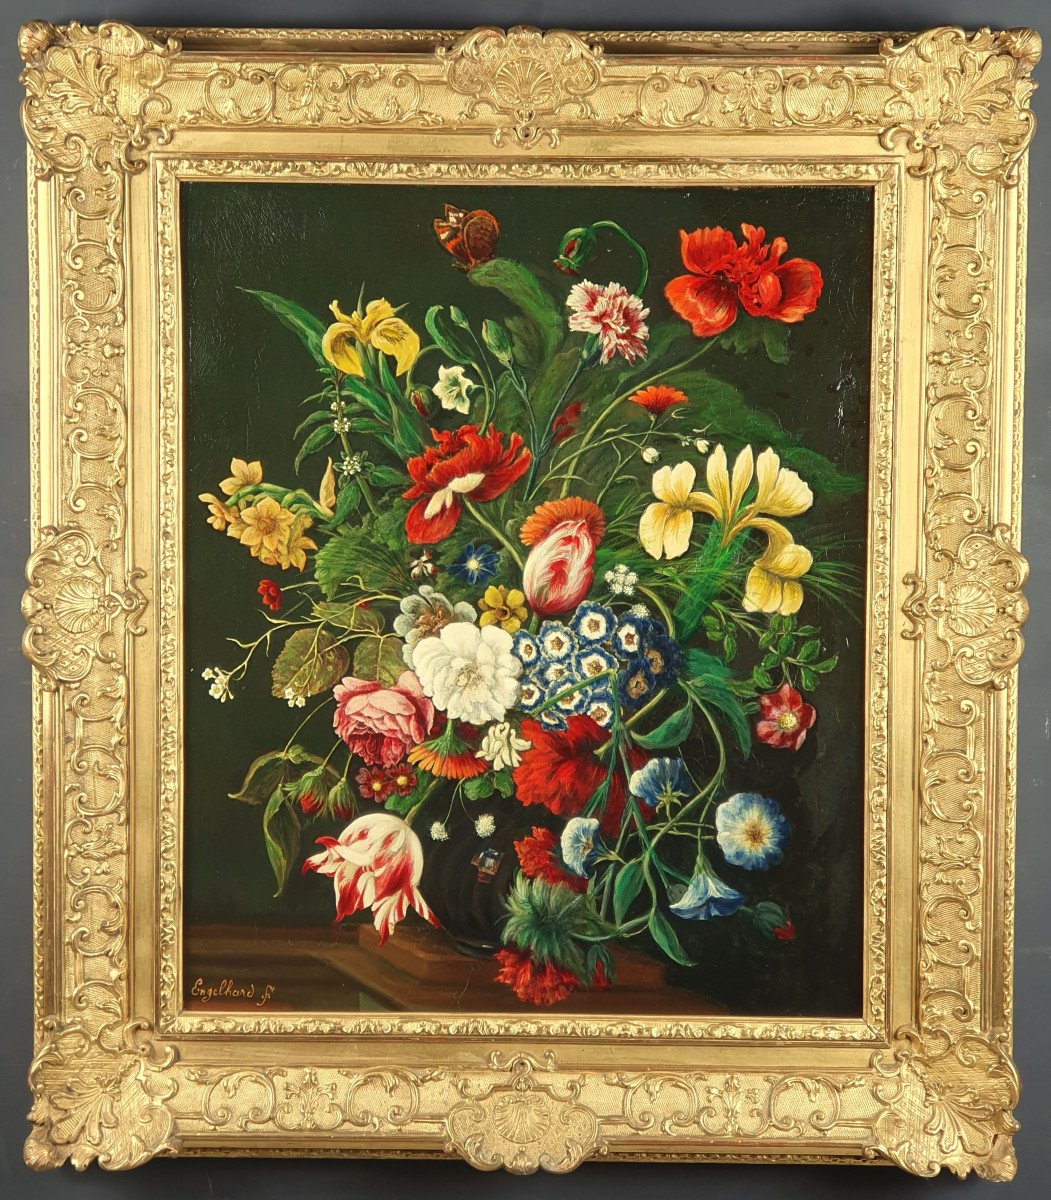 Dutch School - Oil On Canvas - Floral Composition In The Style Of The Seventeen Century